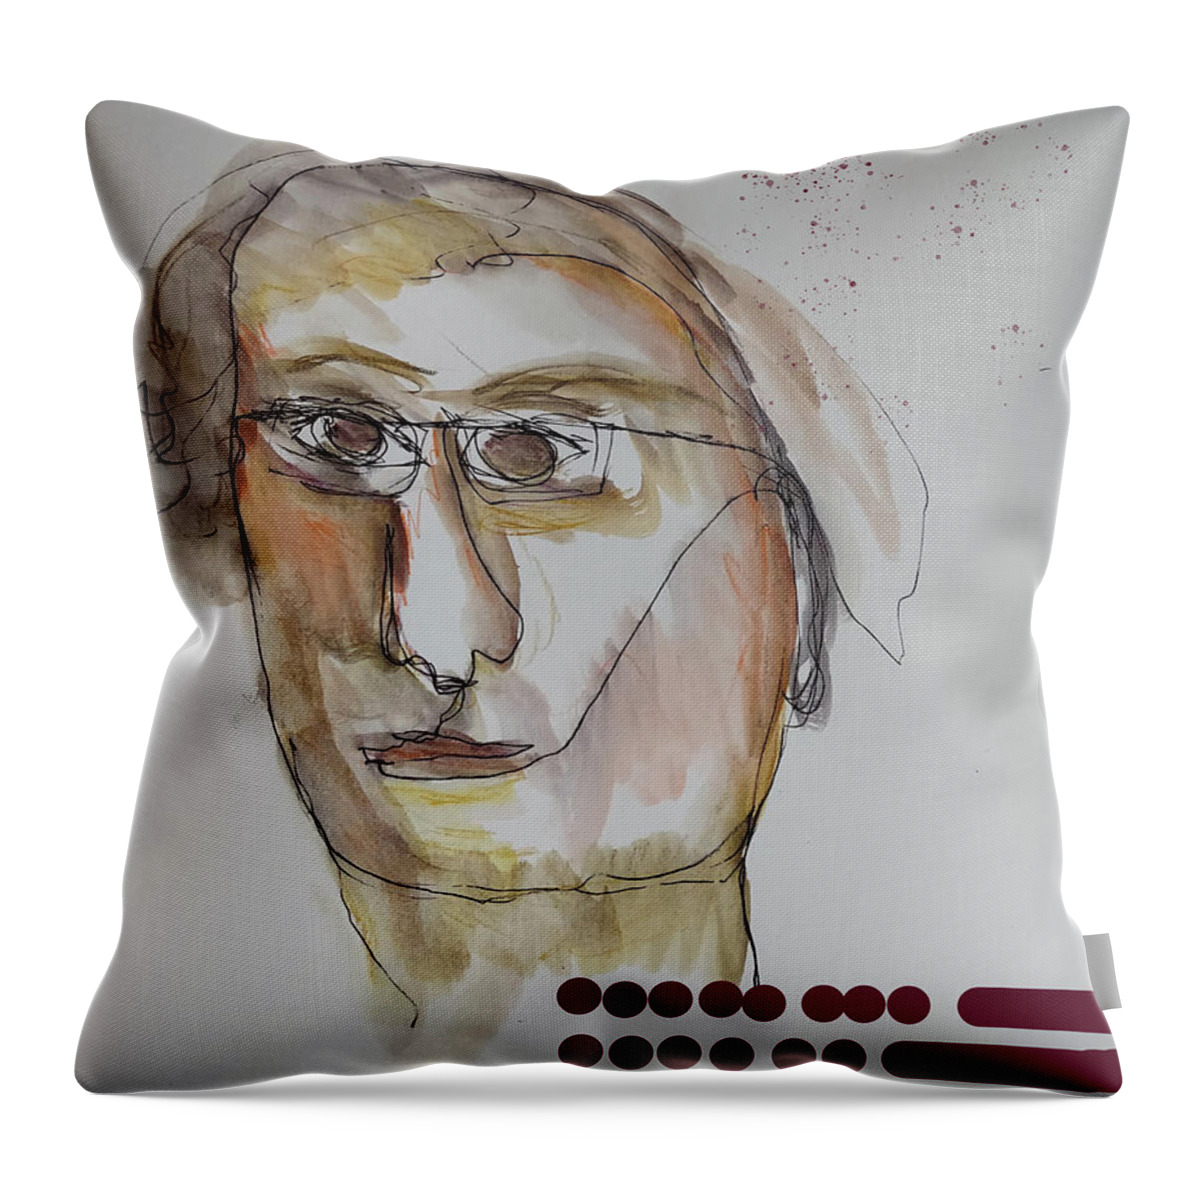 Abstract Throw Pillow featuring the painting Abstracted realism portrait 3122023 by Cathy Anderson